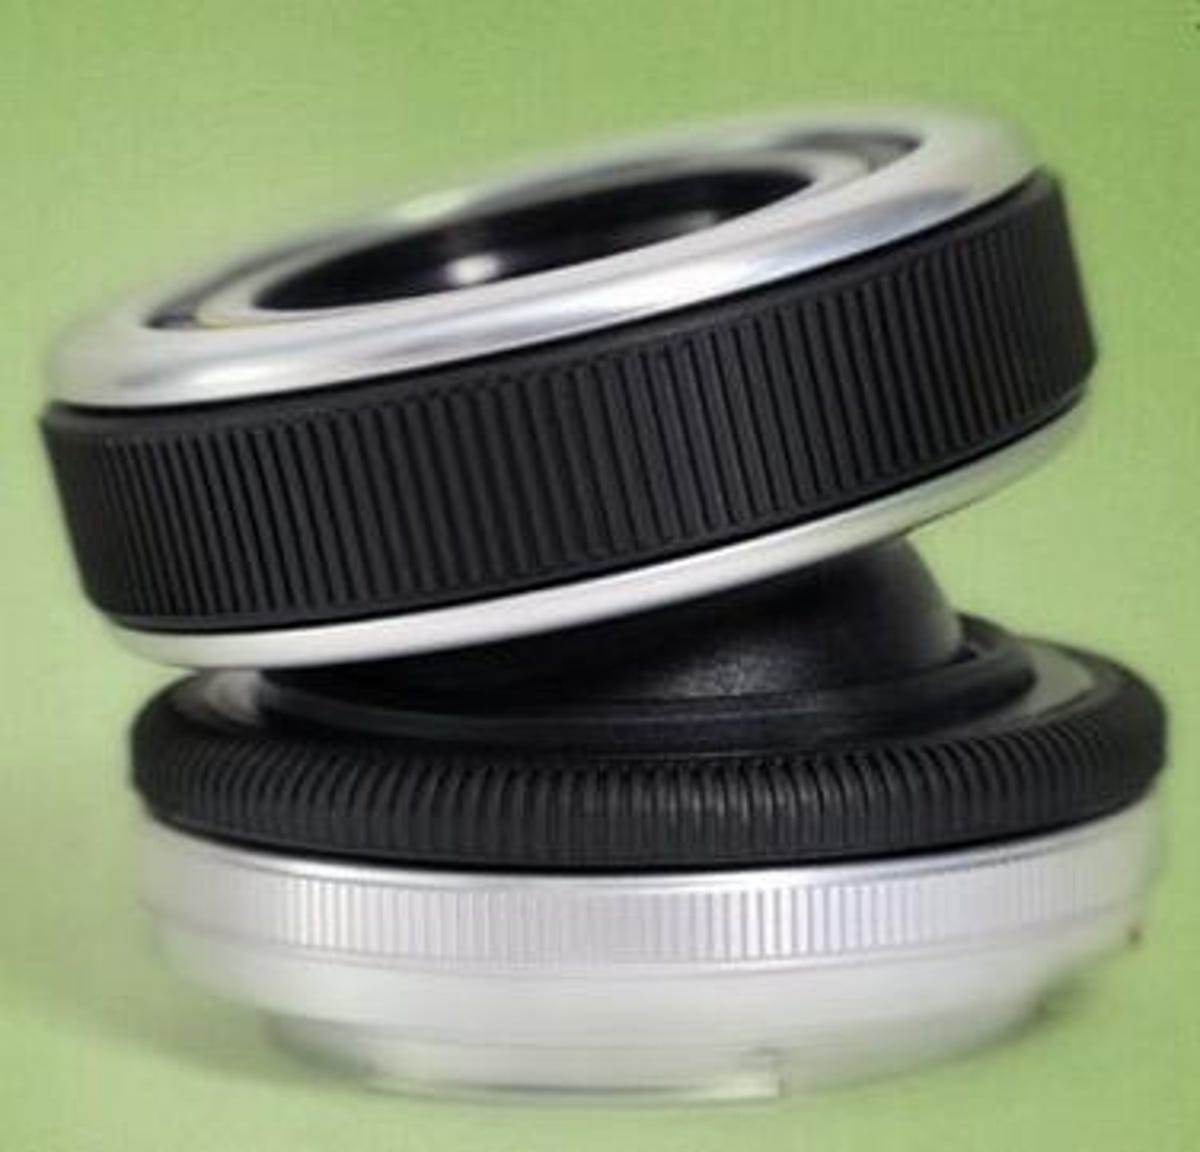 The Lensbaby Composer has a traditional focusing ring.